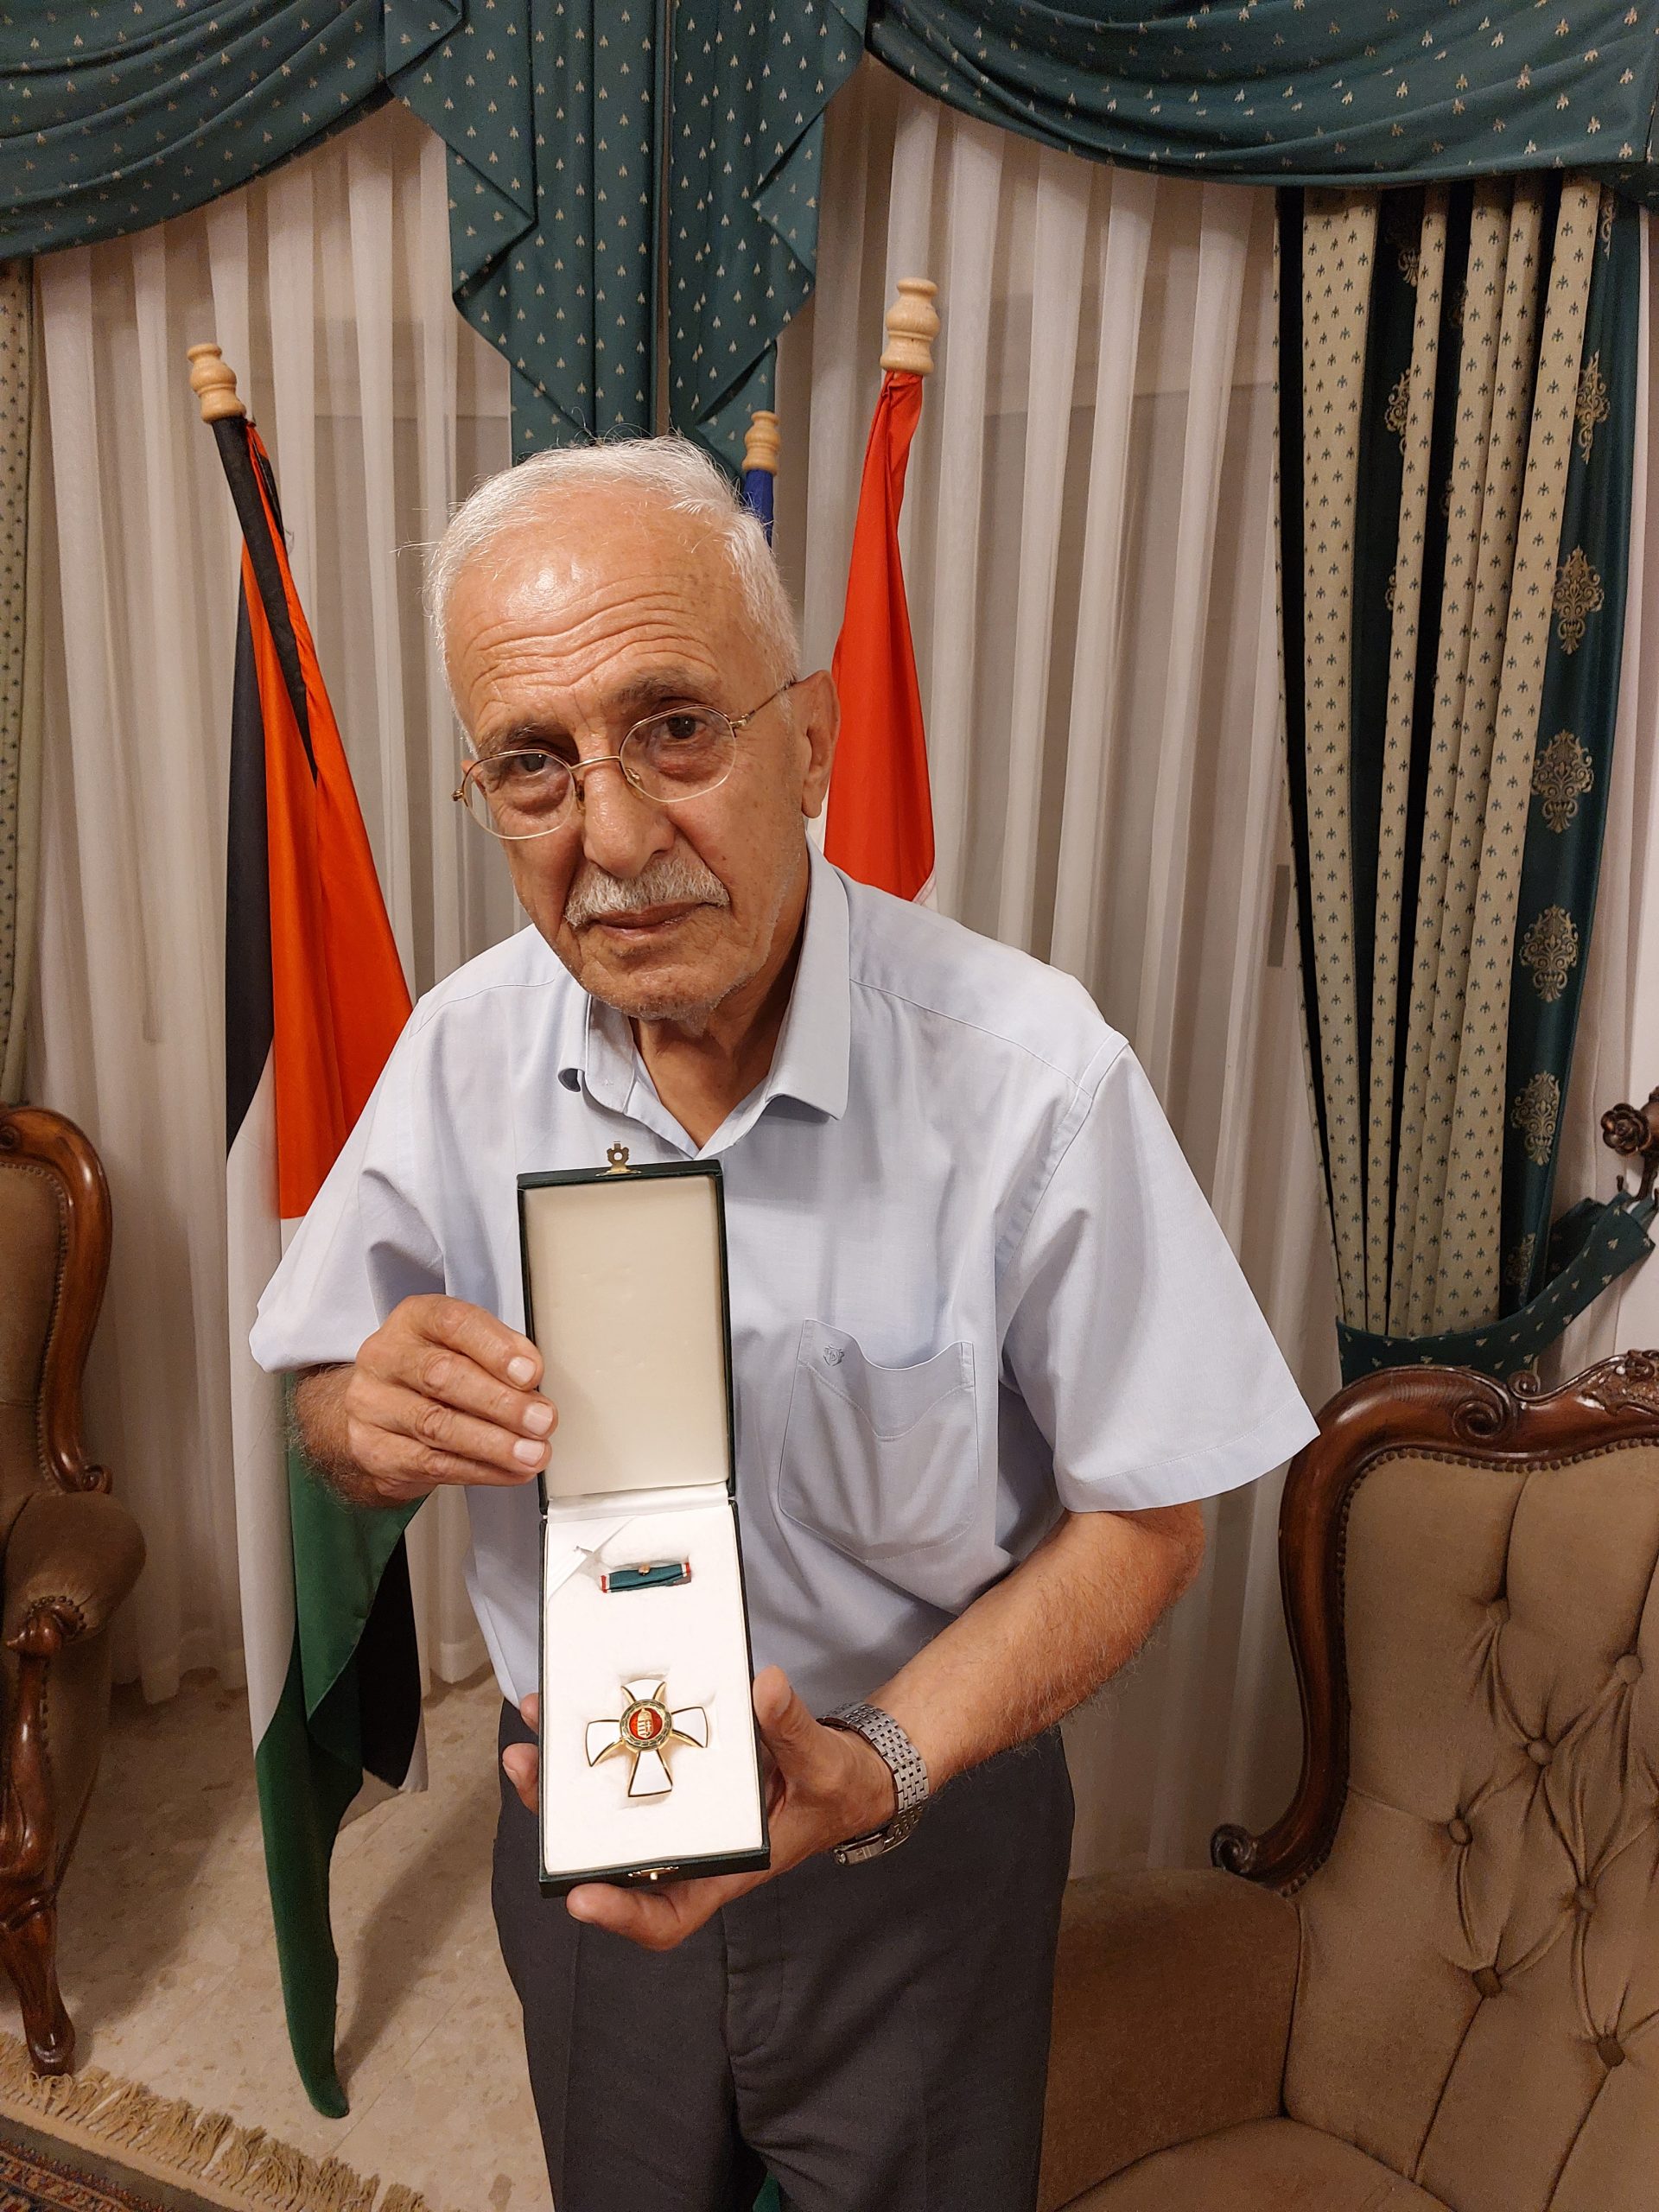 Palestine Report I. – Interview with Dr. Khamis Nassar, Honorary Consul of Hungary in Palestine